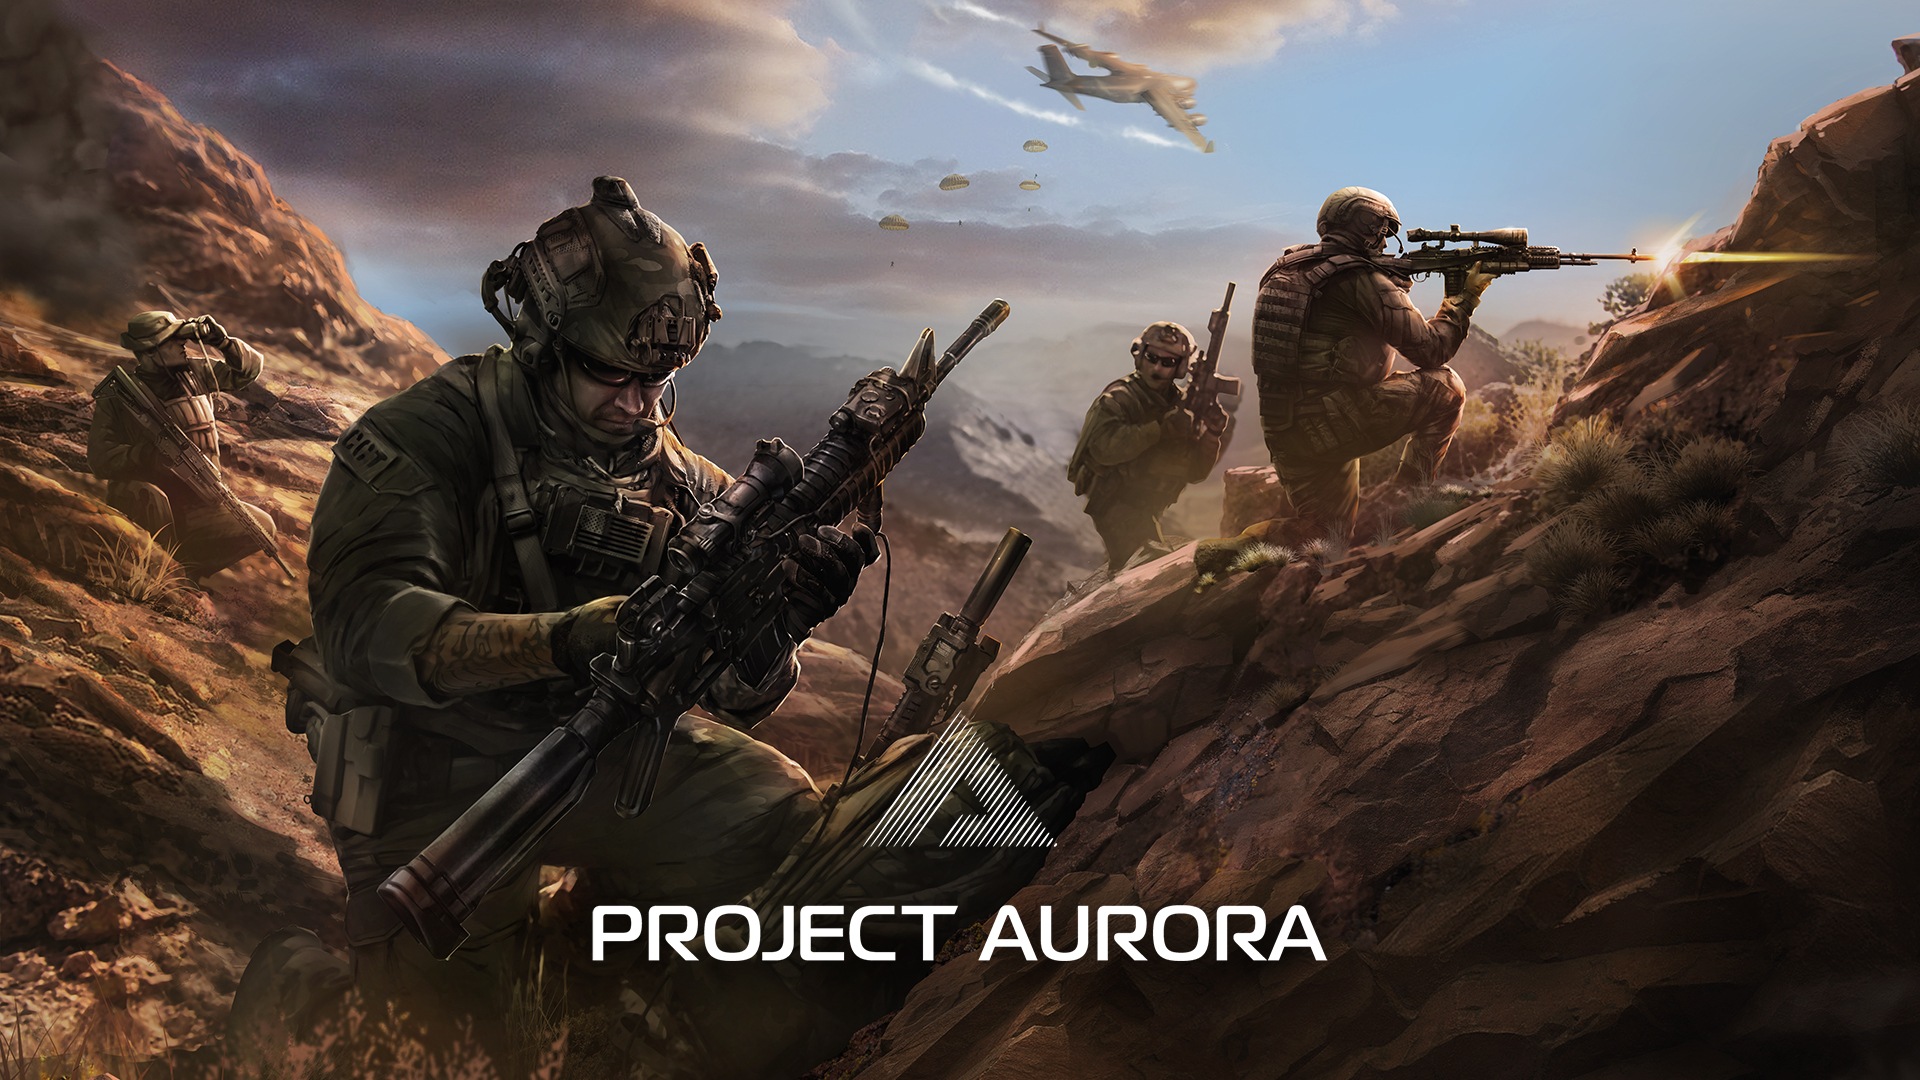 Return of Verdansk in Call of Duty: Warzone but on Mobile, Say leaks as ‘Project Aurora’ Progress Gains Wind